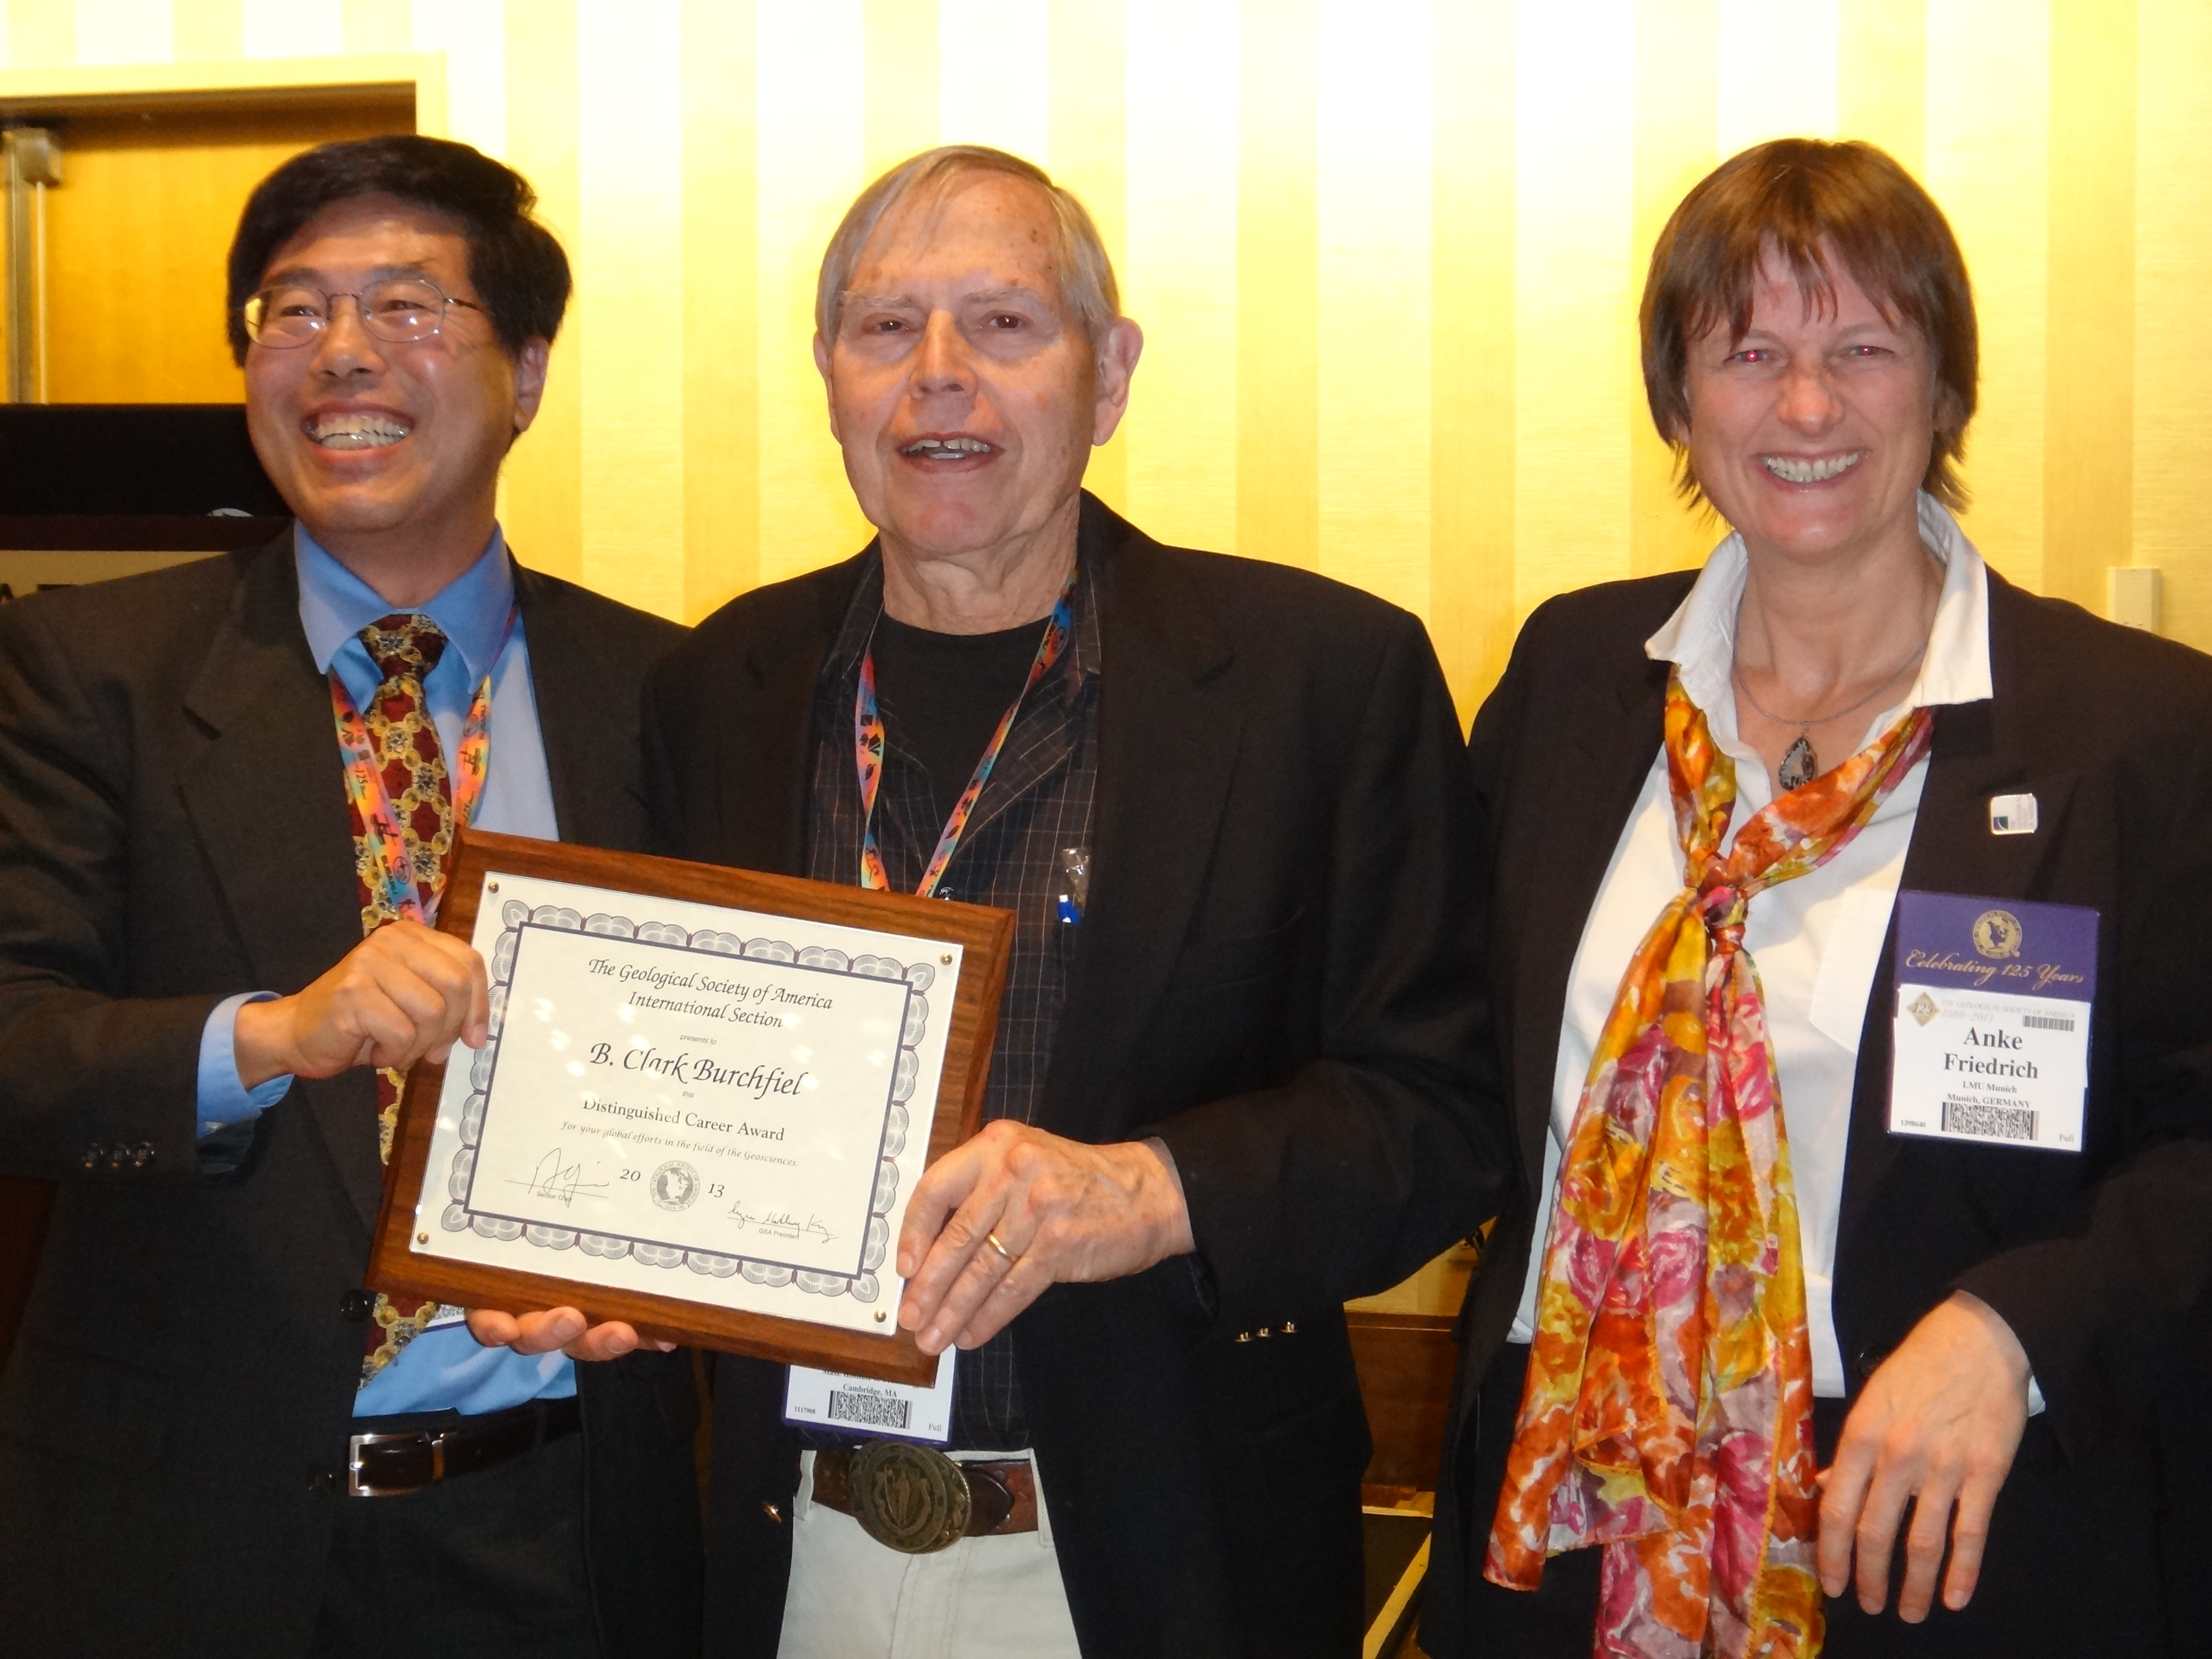  - dr-clark-burchfiel-centerreceiving-distinguished-career-award-from-dr-an-yin-gsa-is-chair-dr-anke-friedrich-incoming-gsa-is-chair-dsc02521-fig-3